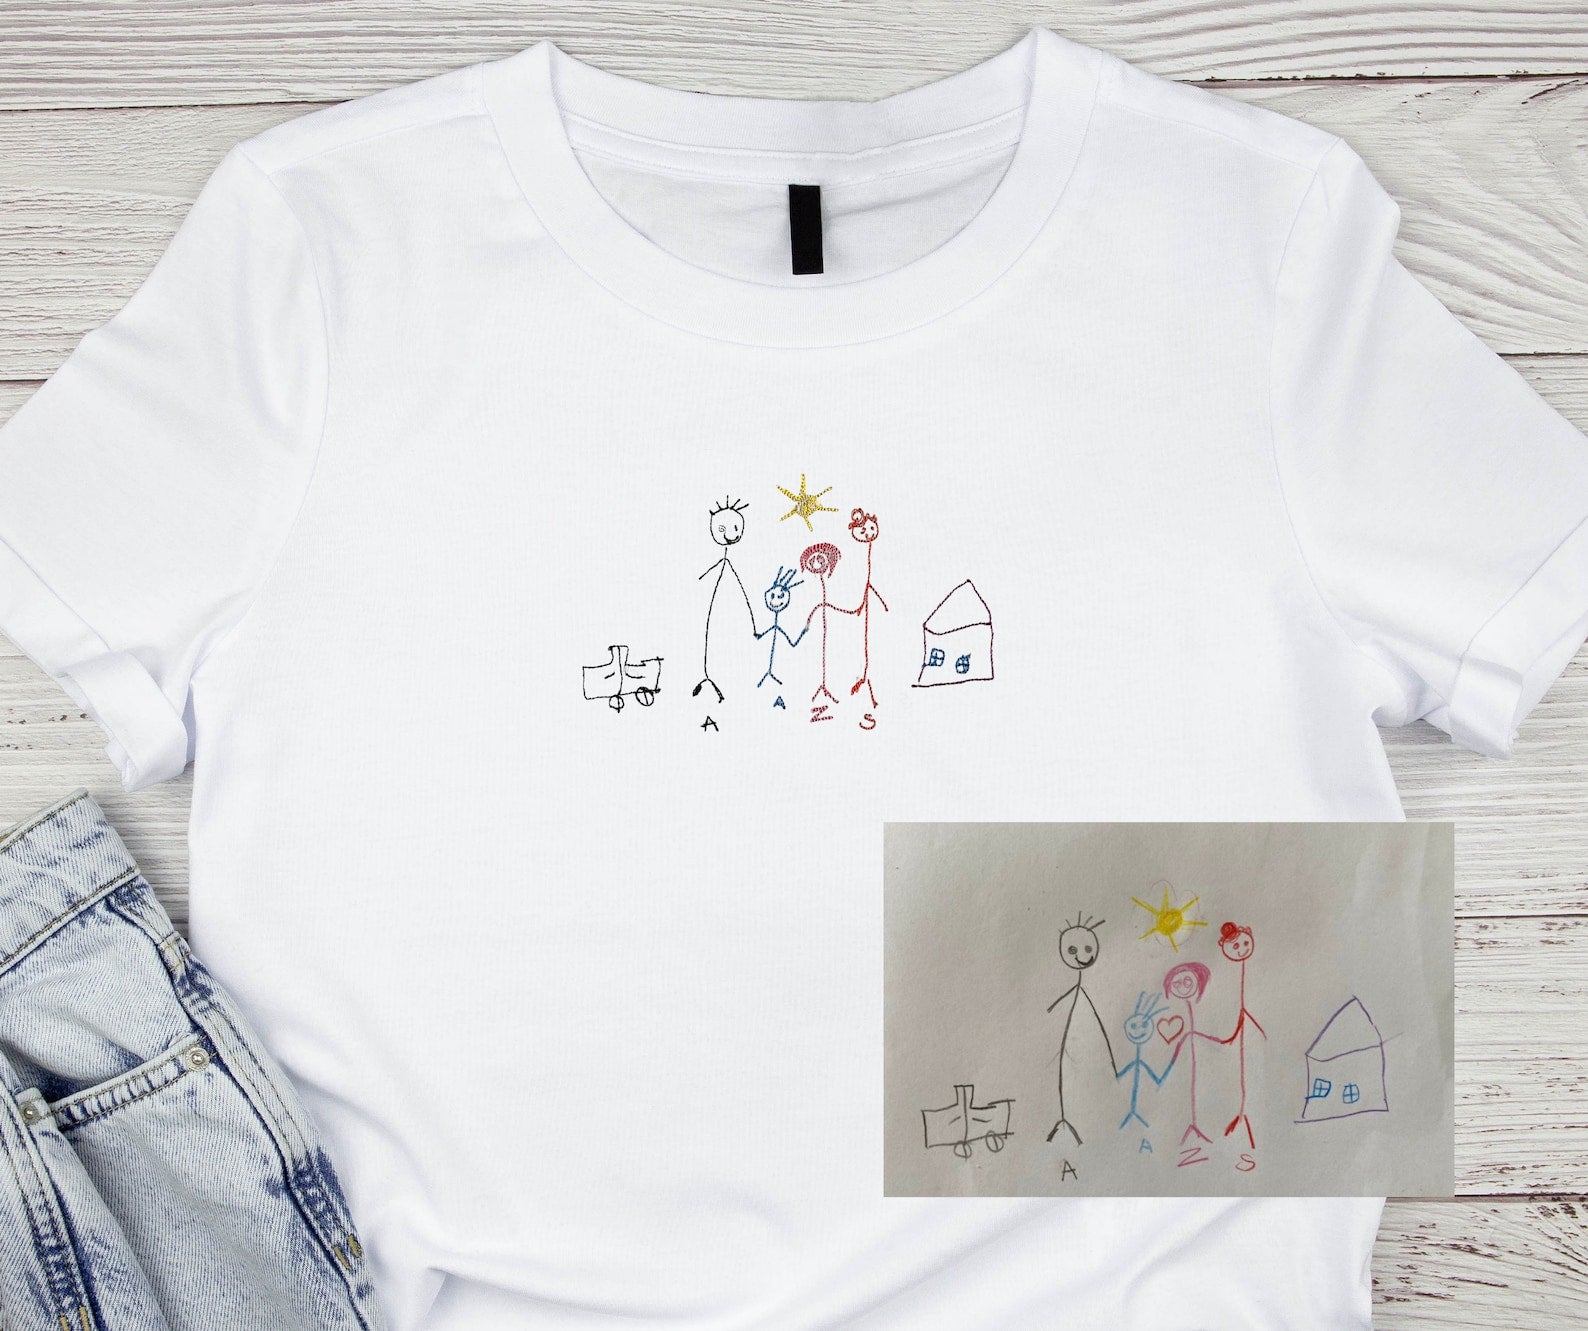 Custom Embroidered Kids Drawing Artwork Sweatshirt, Hoodie, Custom Kids Photo Drawing, Personalized Unique Gift for Moms, Dads, Grandparents